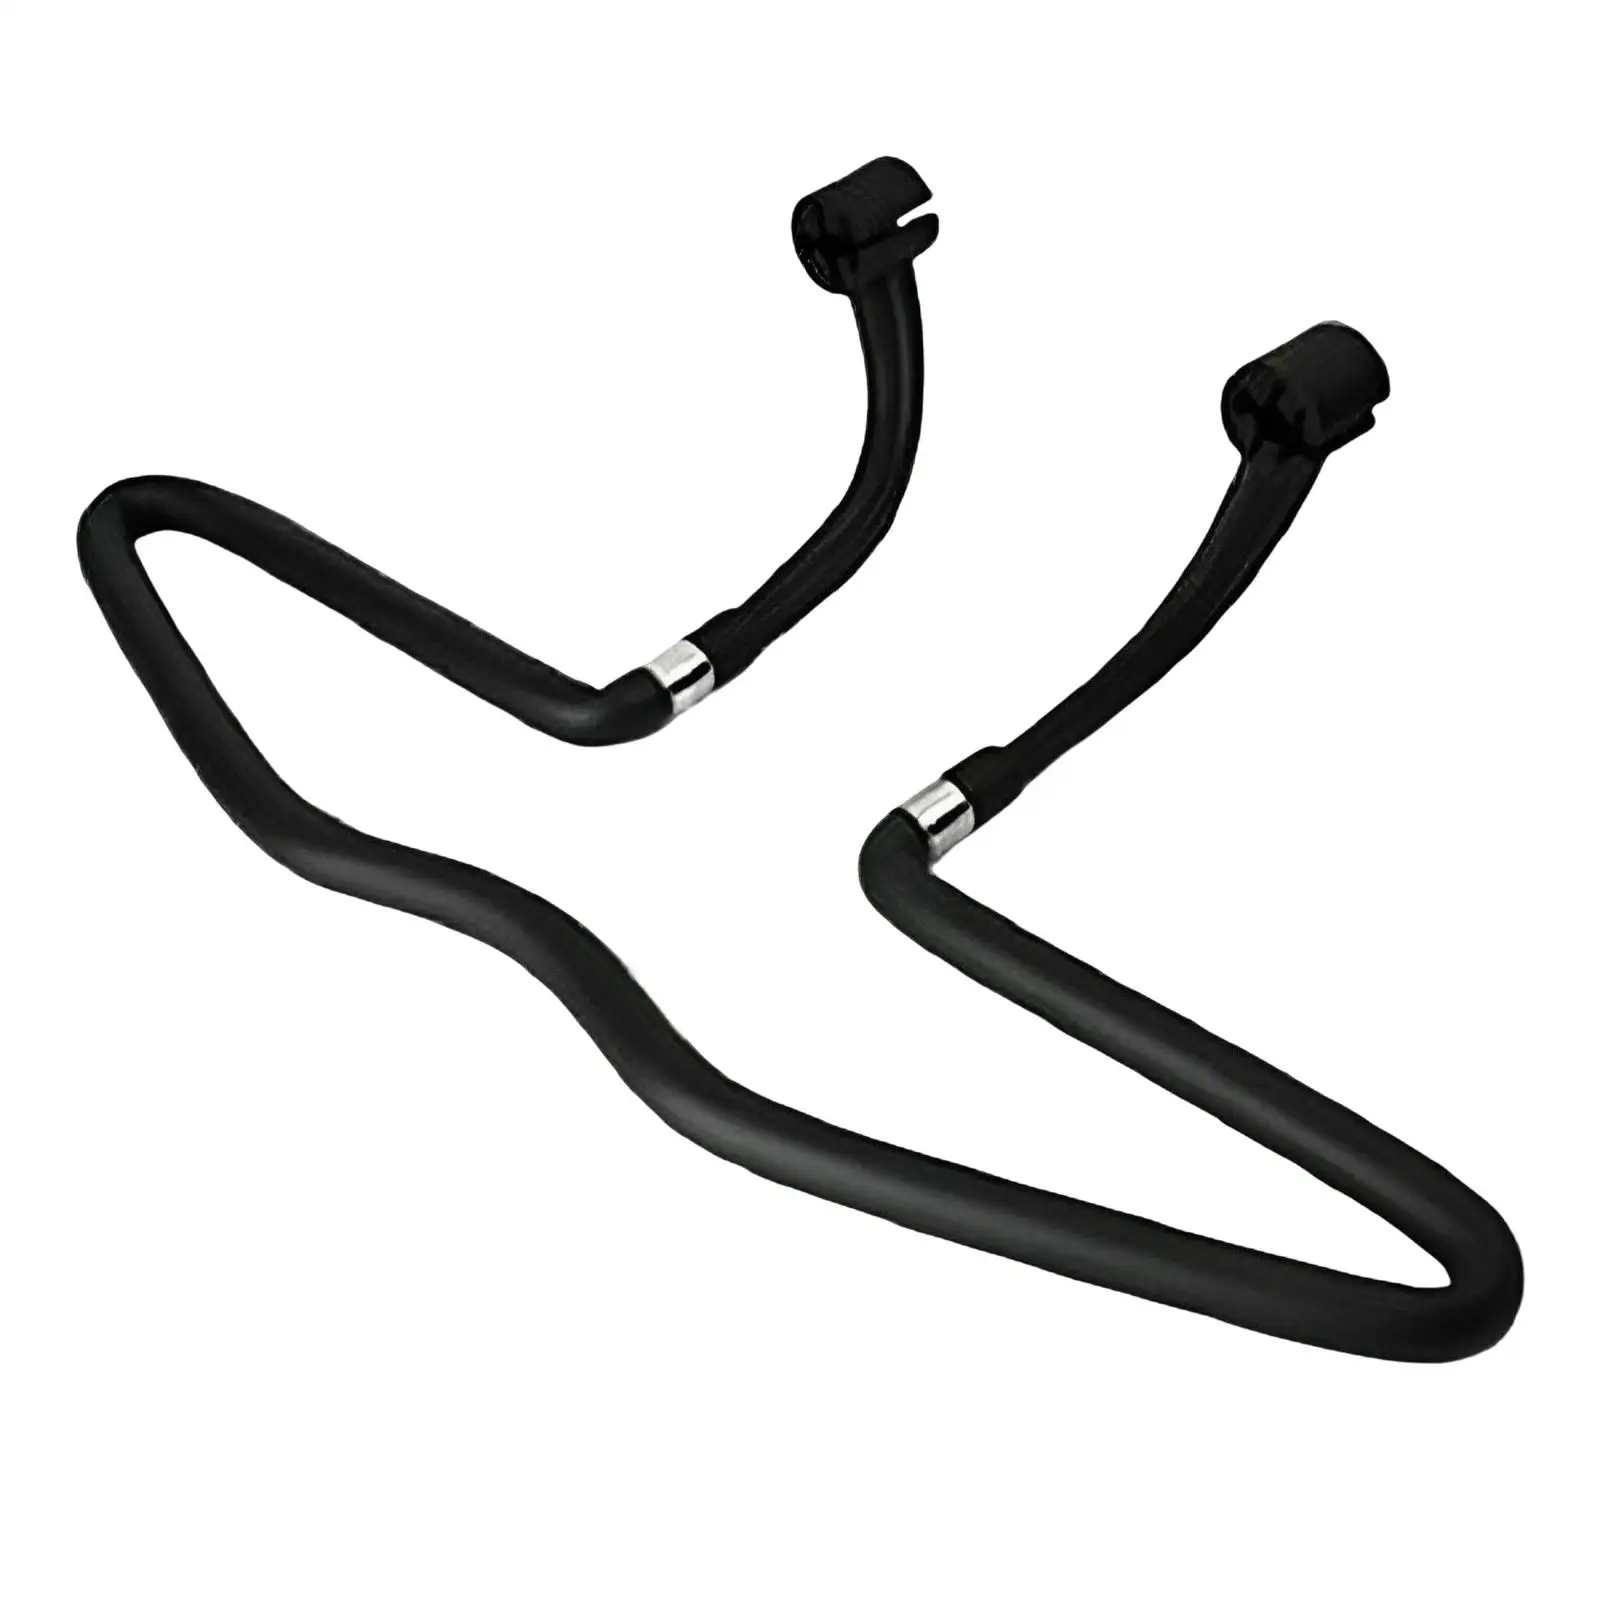 Car Seat Hangers Auto Seat Headrest Clothes Hanging Holder Stand Jackets Bags Coat Hangers Holder Hook Car Accessories